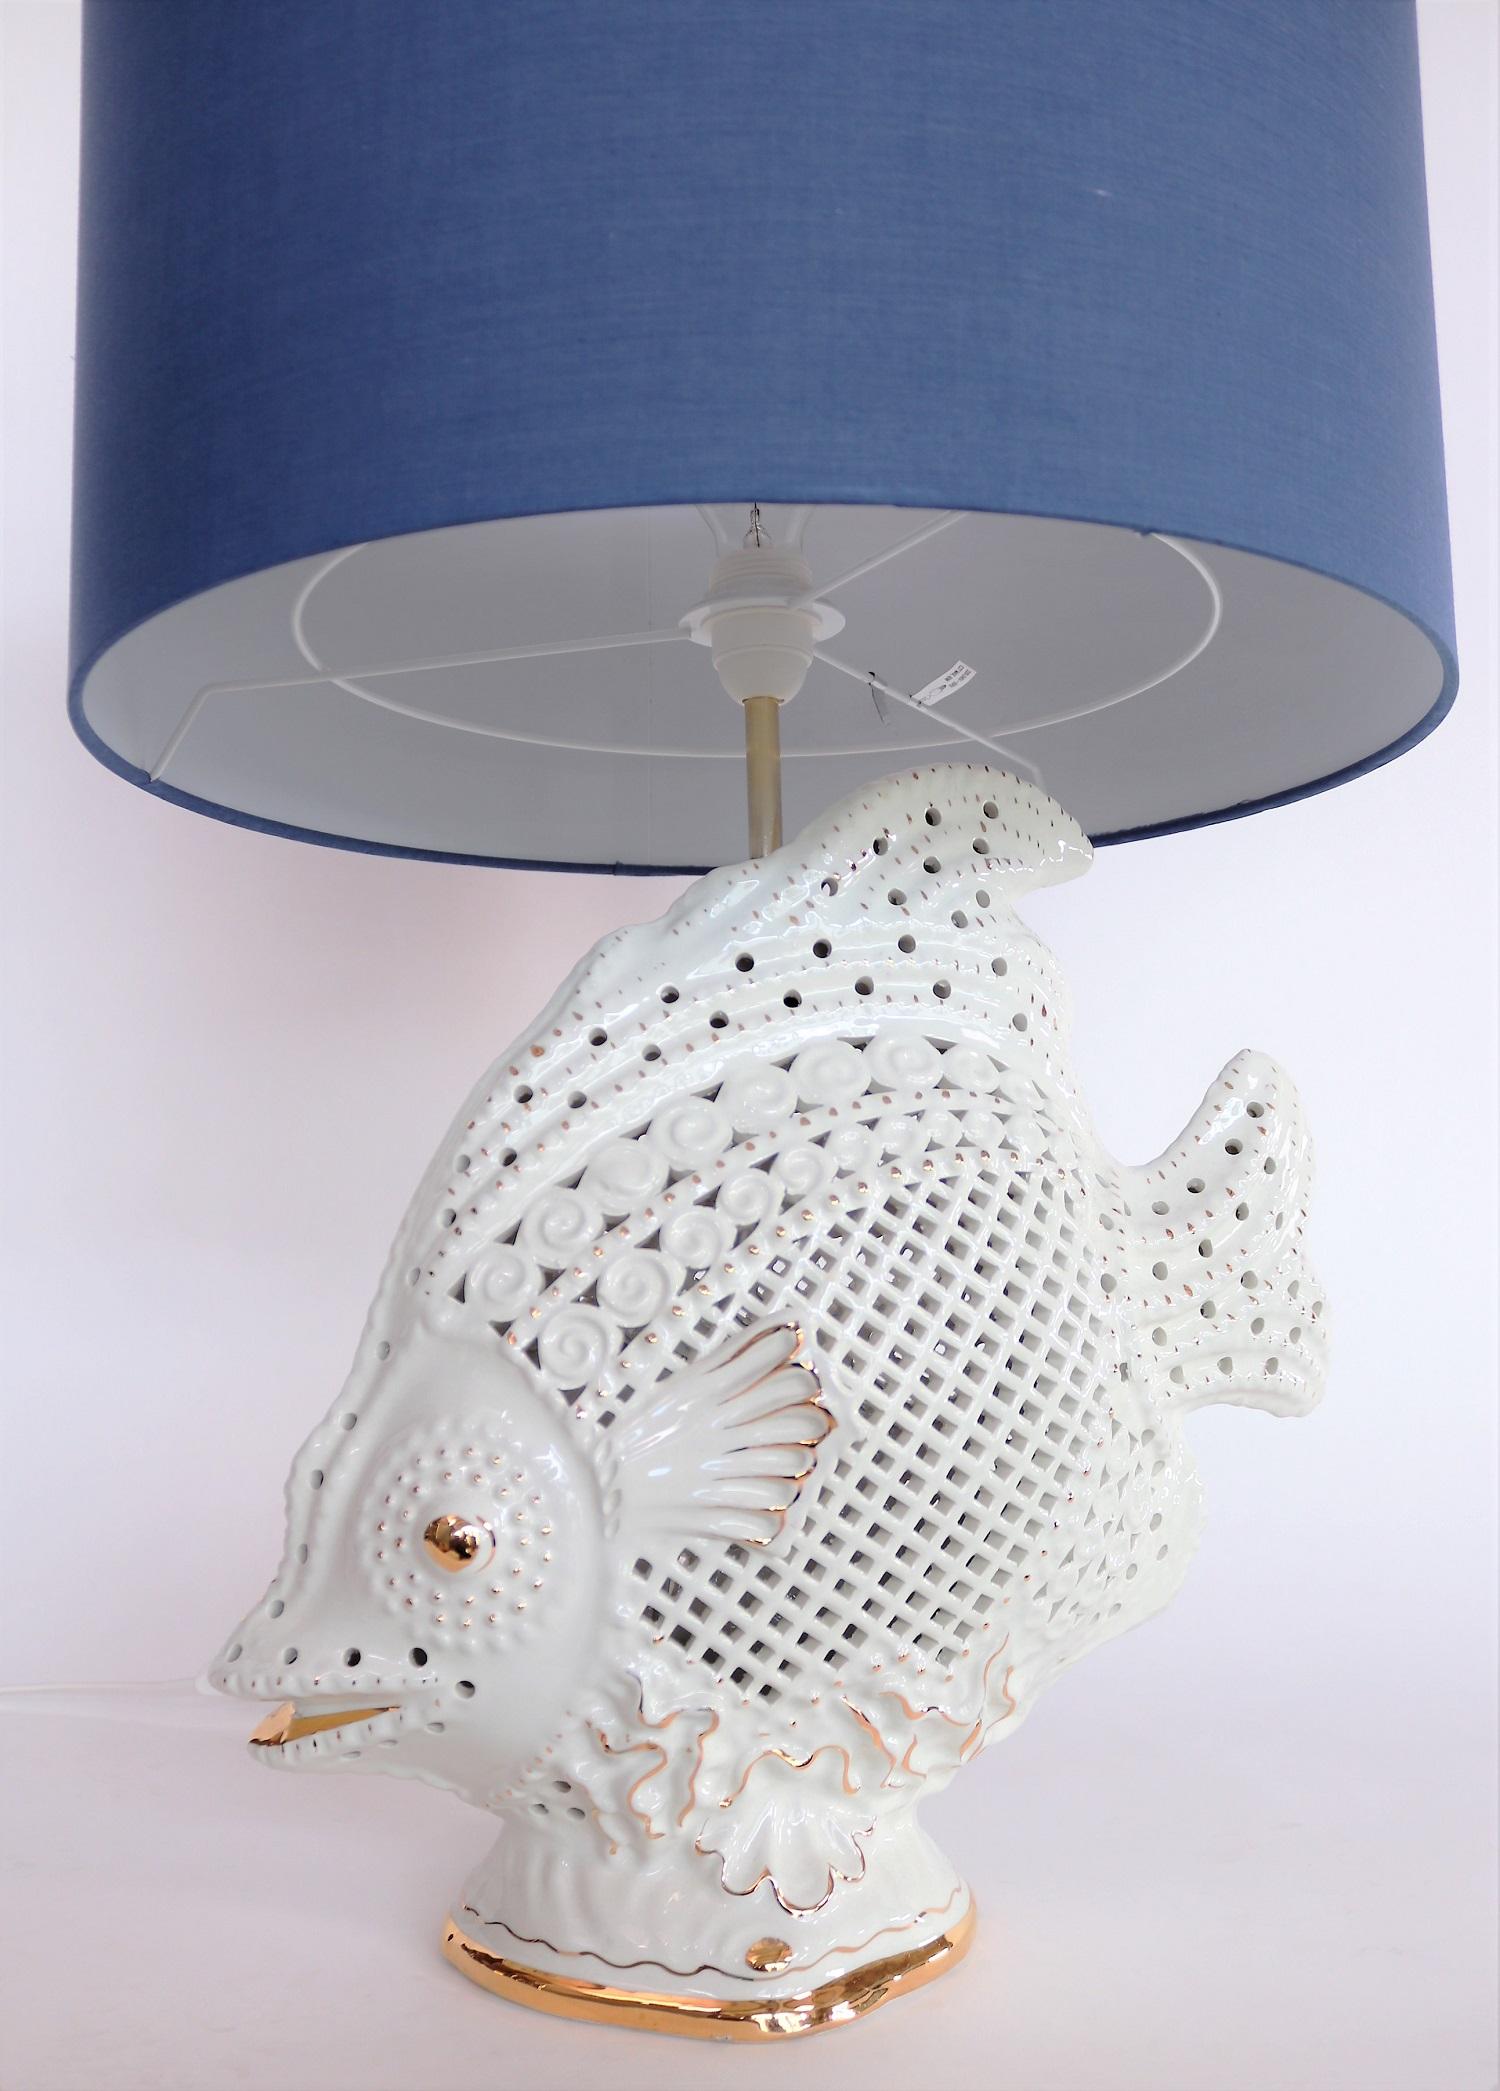 Fabric Italian Midcentury Big Ceramic Fish Lamp with Brass Details, 1960s For Sale